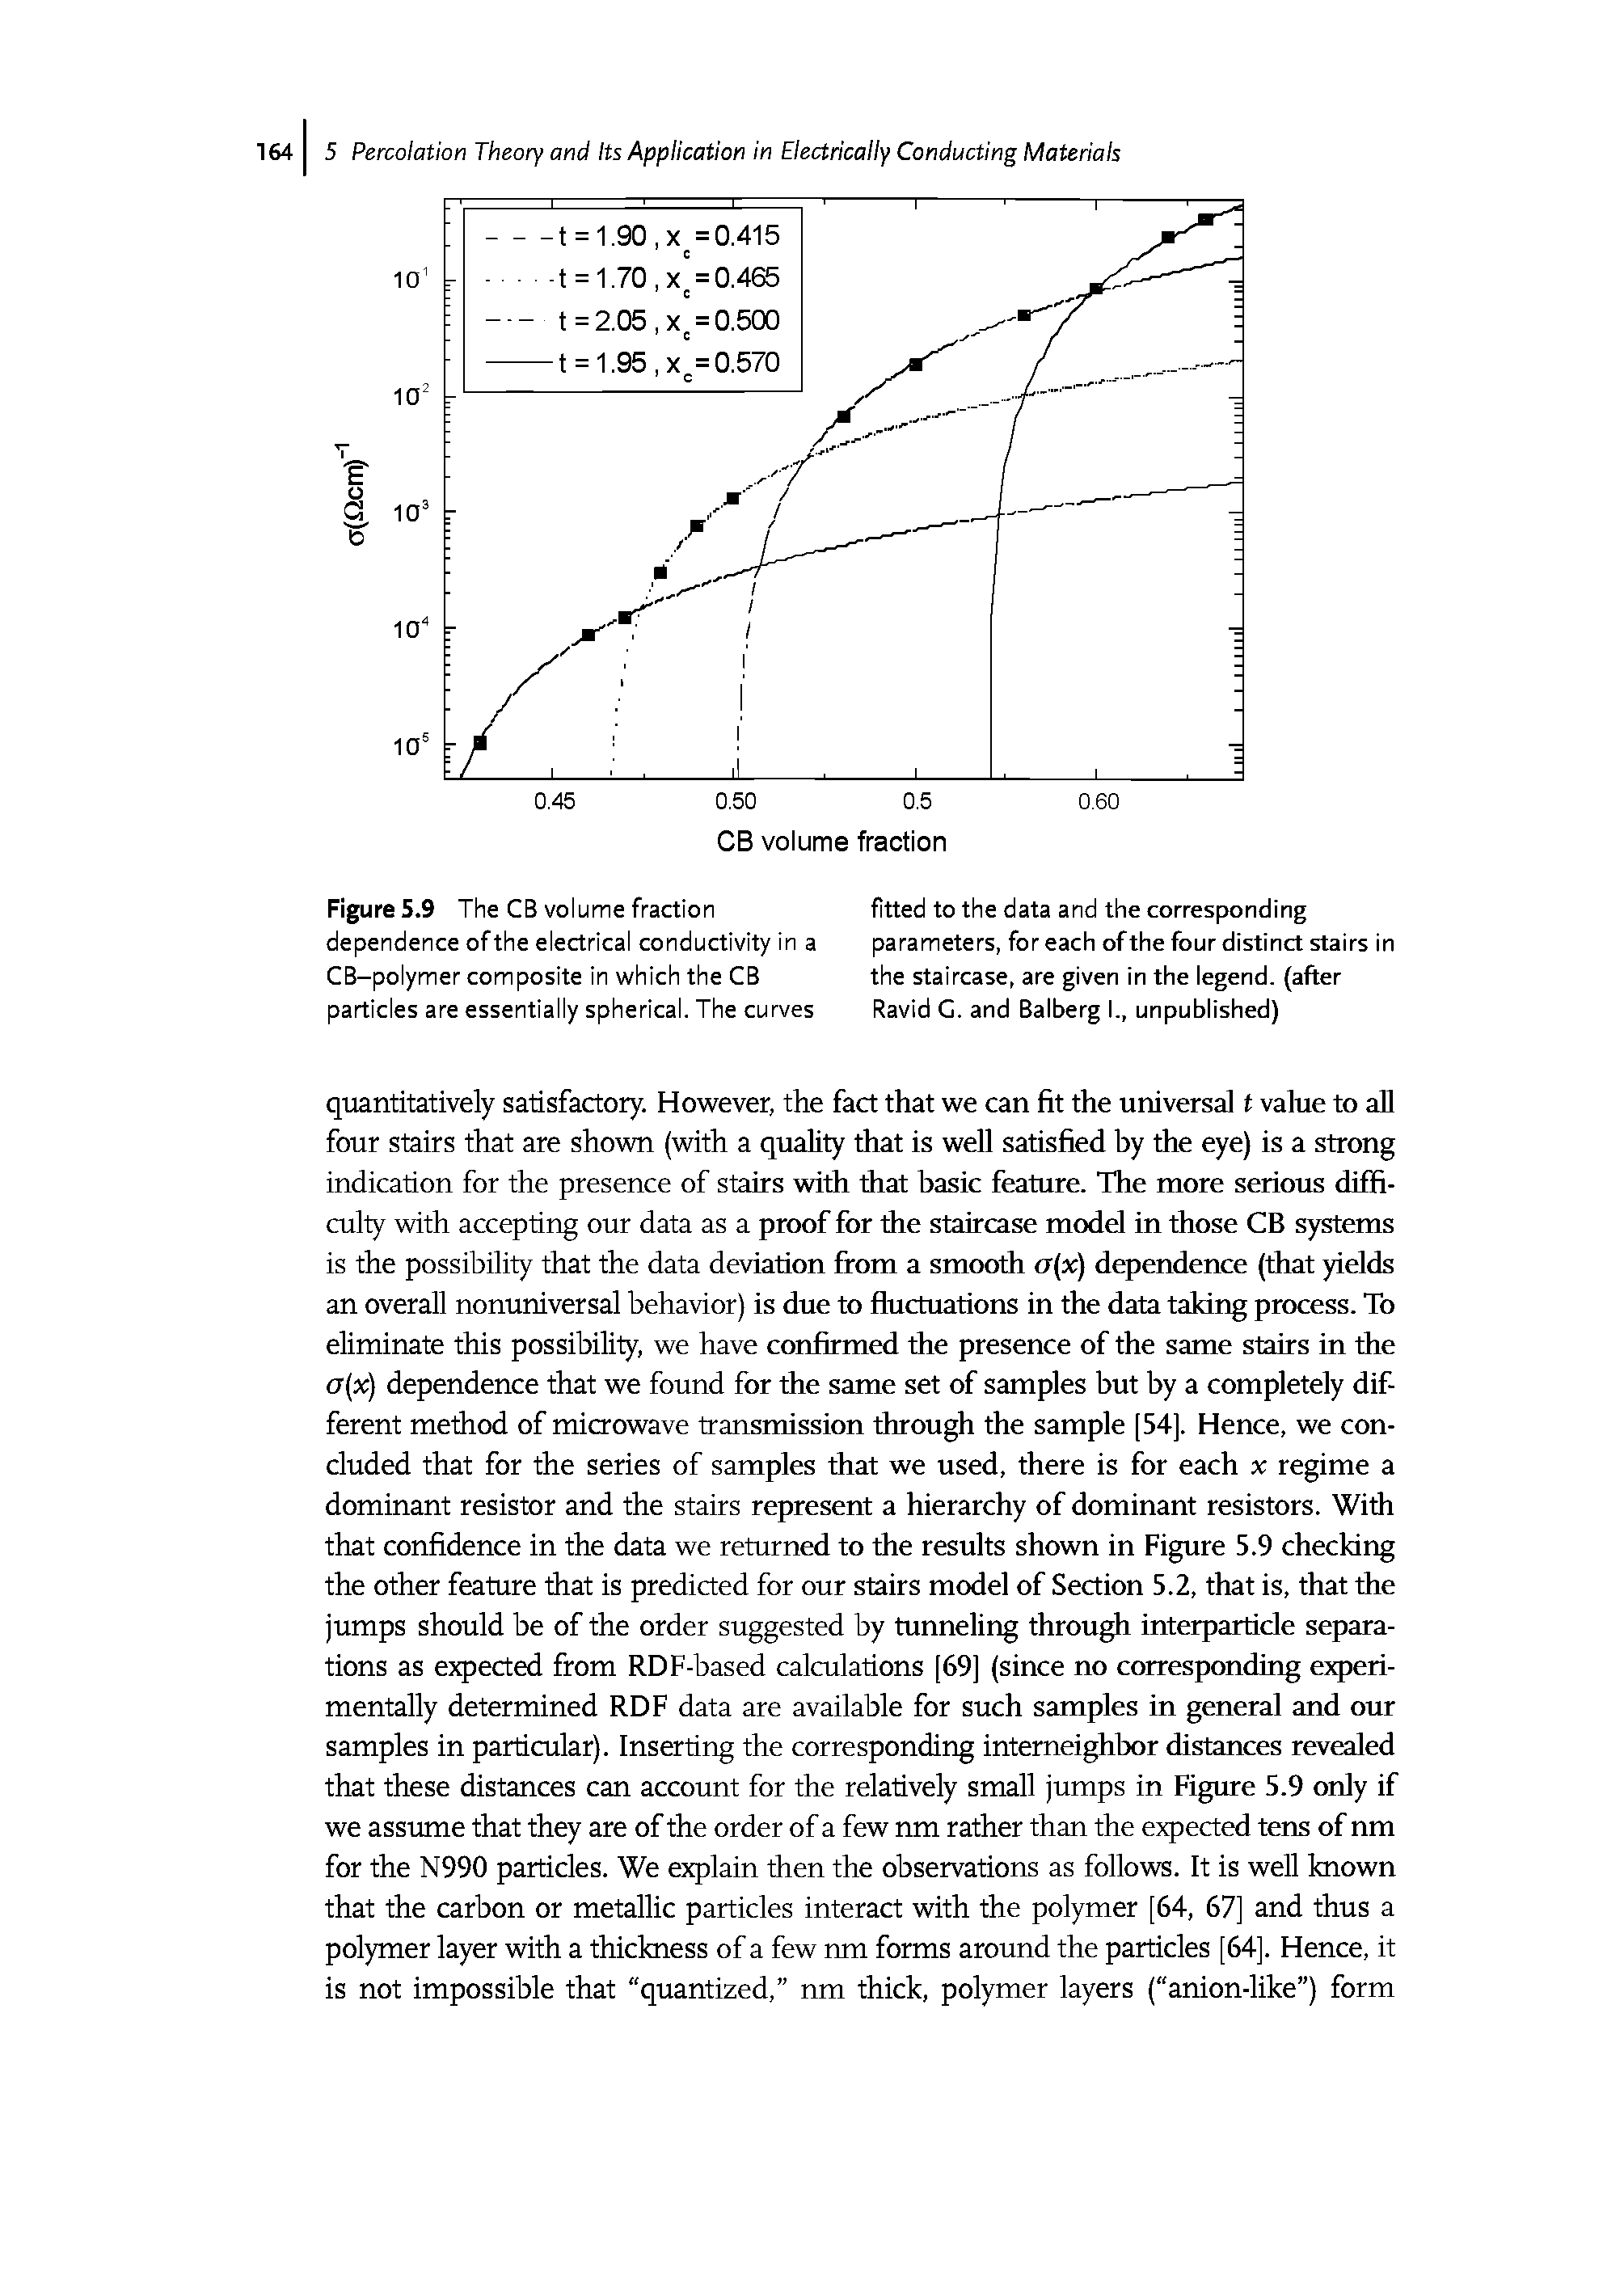 Figure 5.9 The CB volume fraction dependence of the electrical conductivity in a CB-polymer composite in which the CB particles are essentially spherical. The curves...